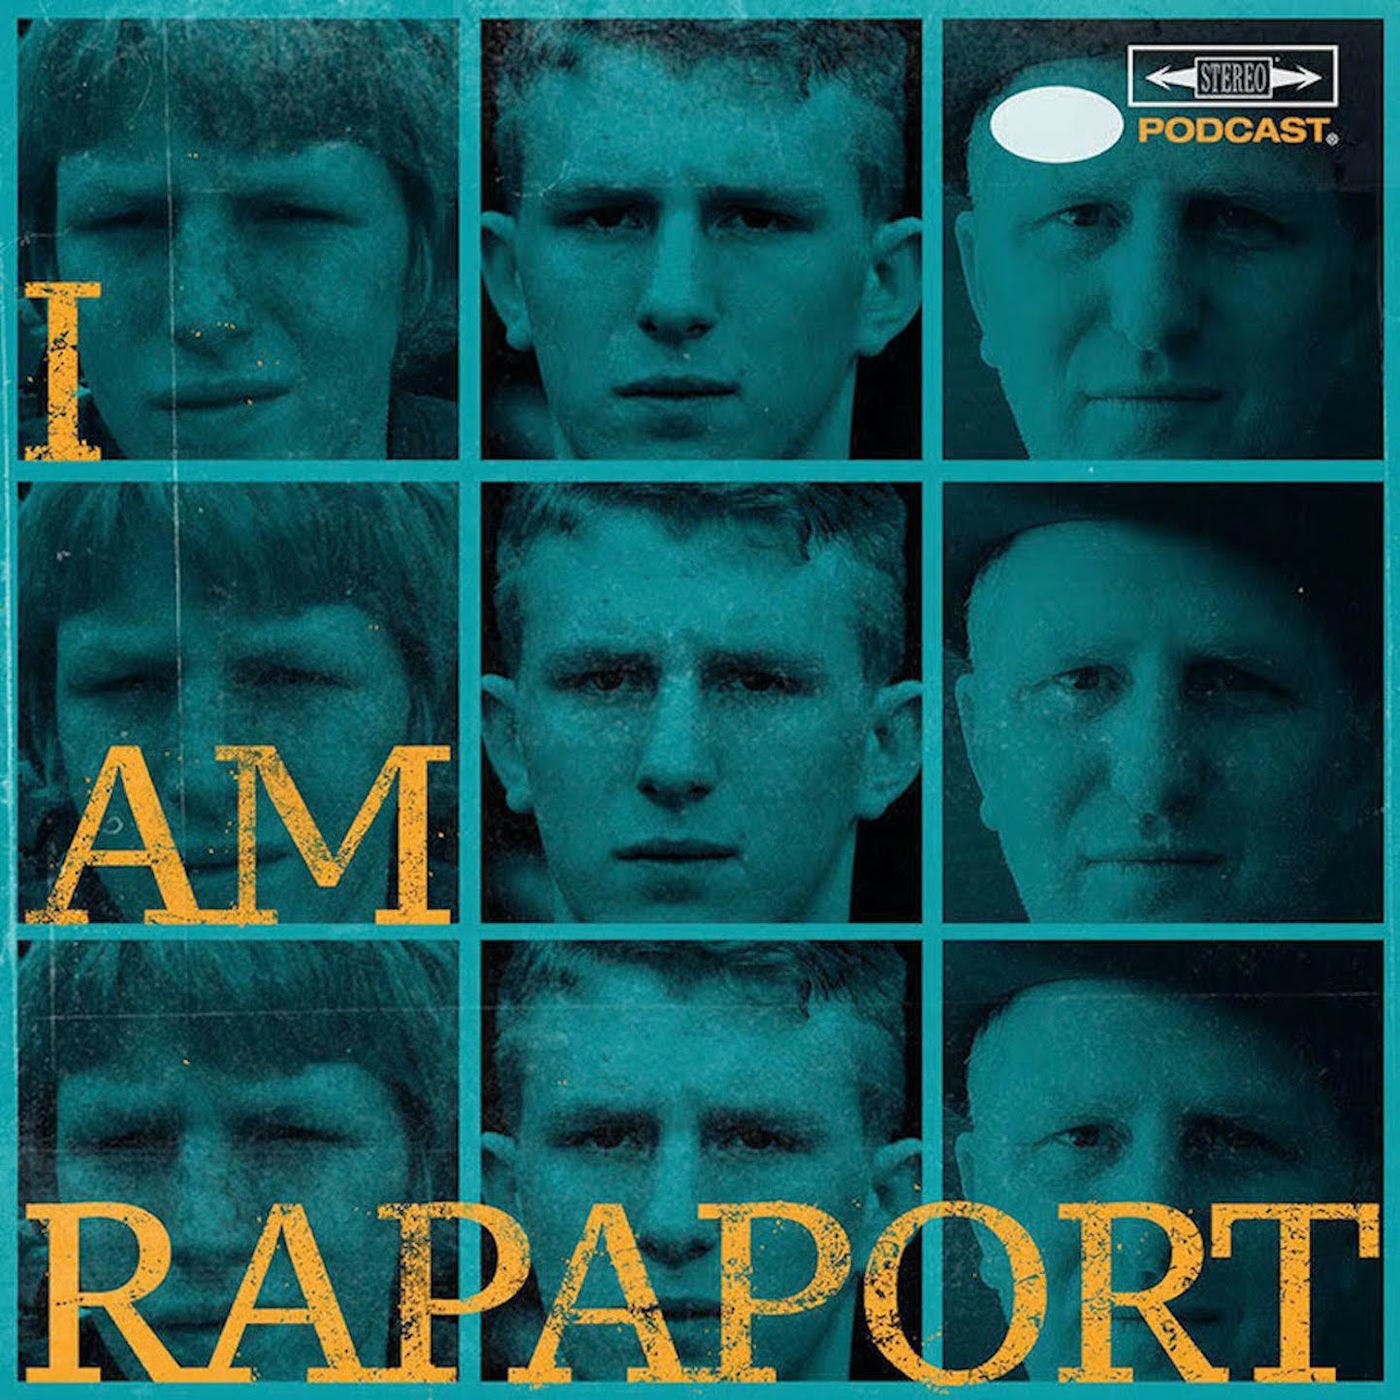 EP 204 - MATTHEW BERRY - FANTASY FOOTBALL FOLLIES 3 - BROUGHT TO YOU BY DRAFTKINGS (PROMO CODE: RAPAPORT)